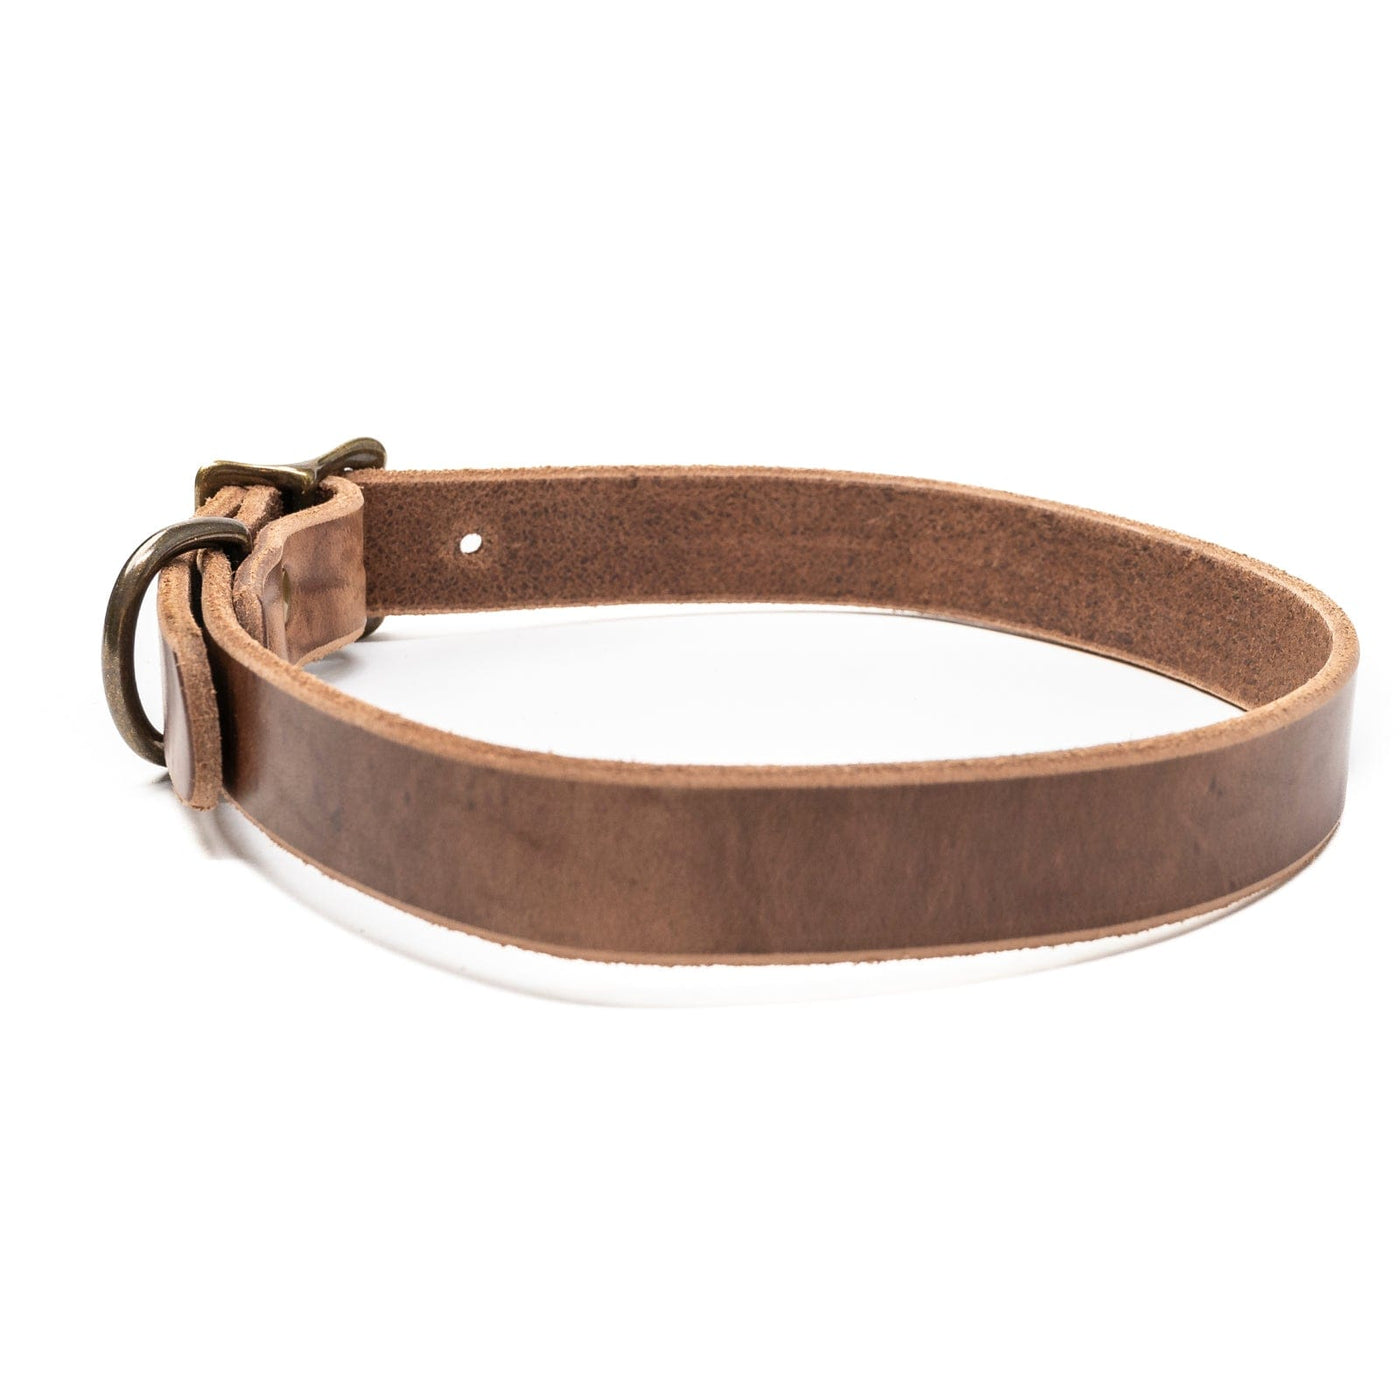 Leather Dog Collar - Natural Popov Leather